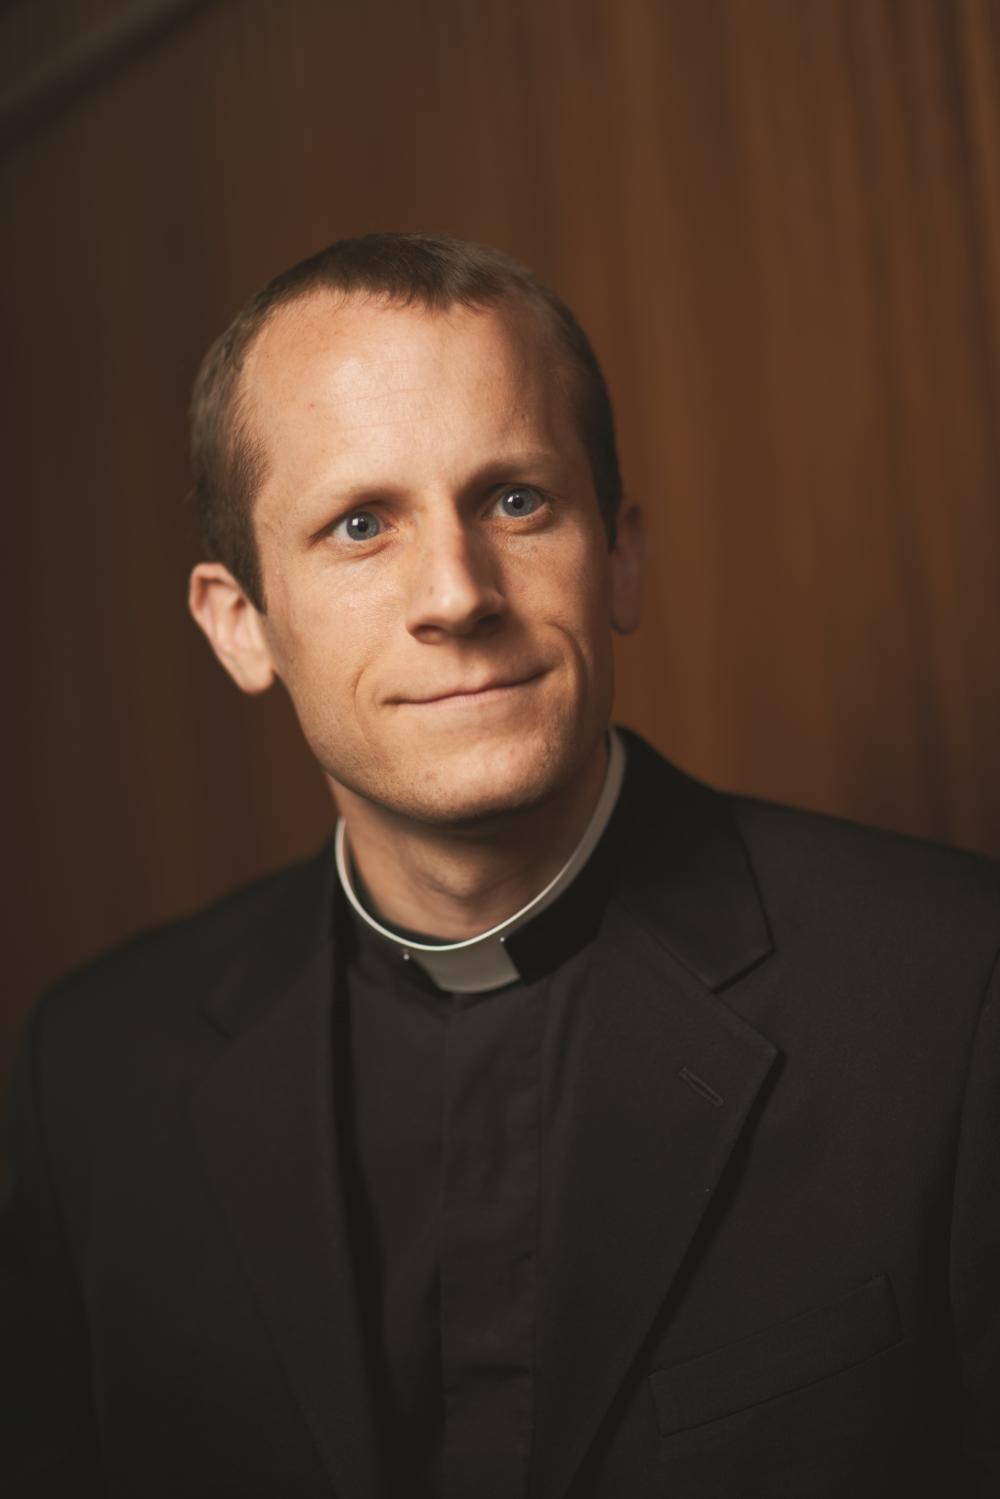 Meet Father John Whitlock, new director of vocations for the Diocese of Lansing